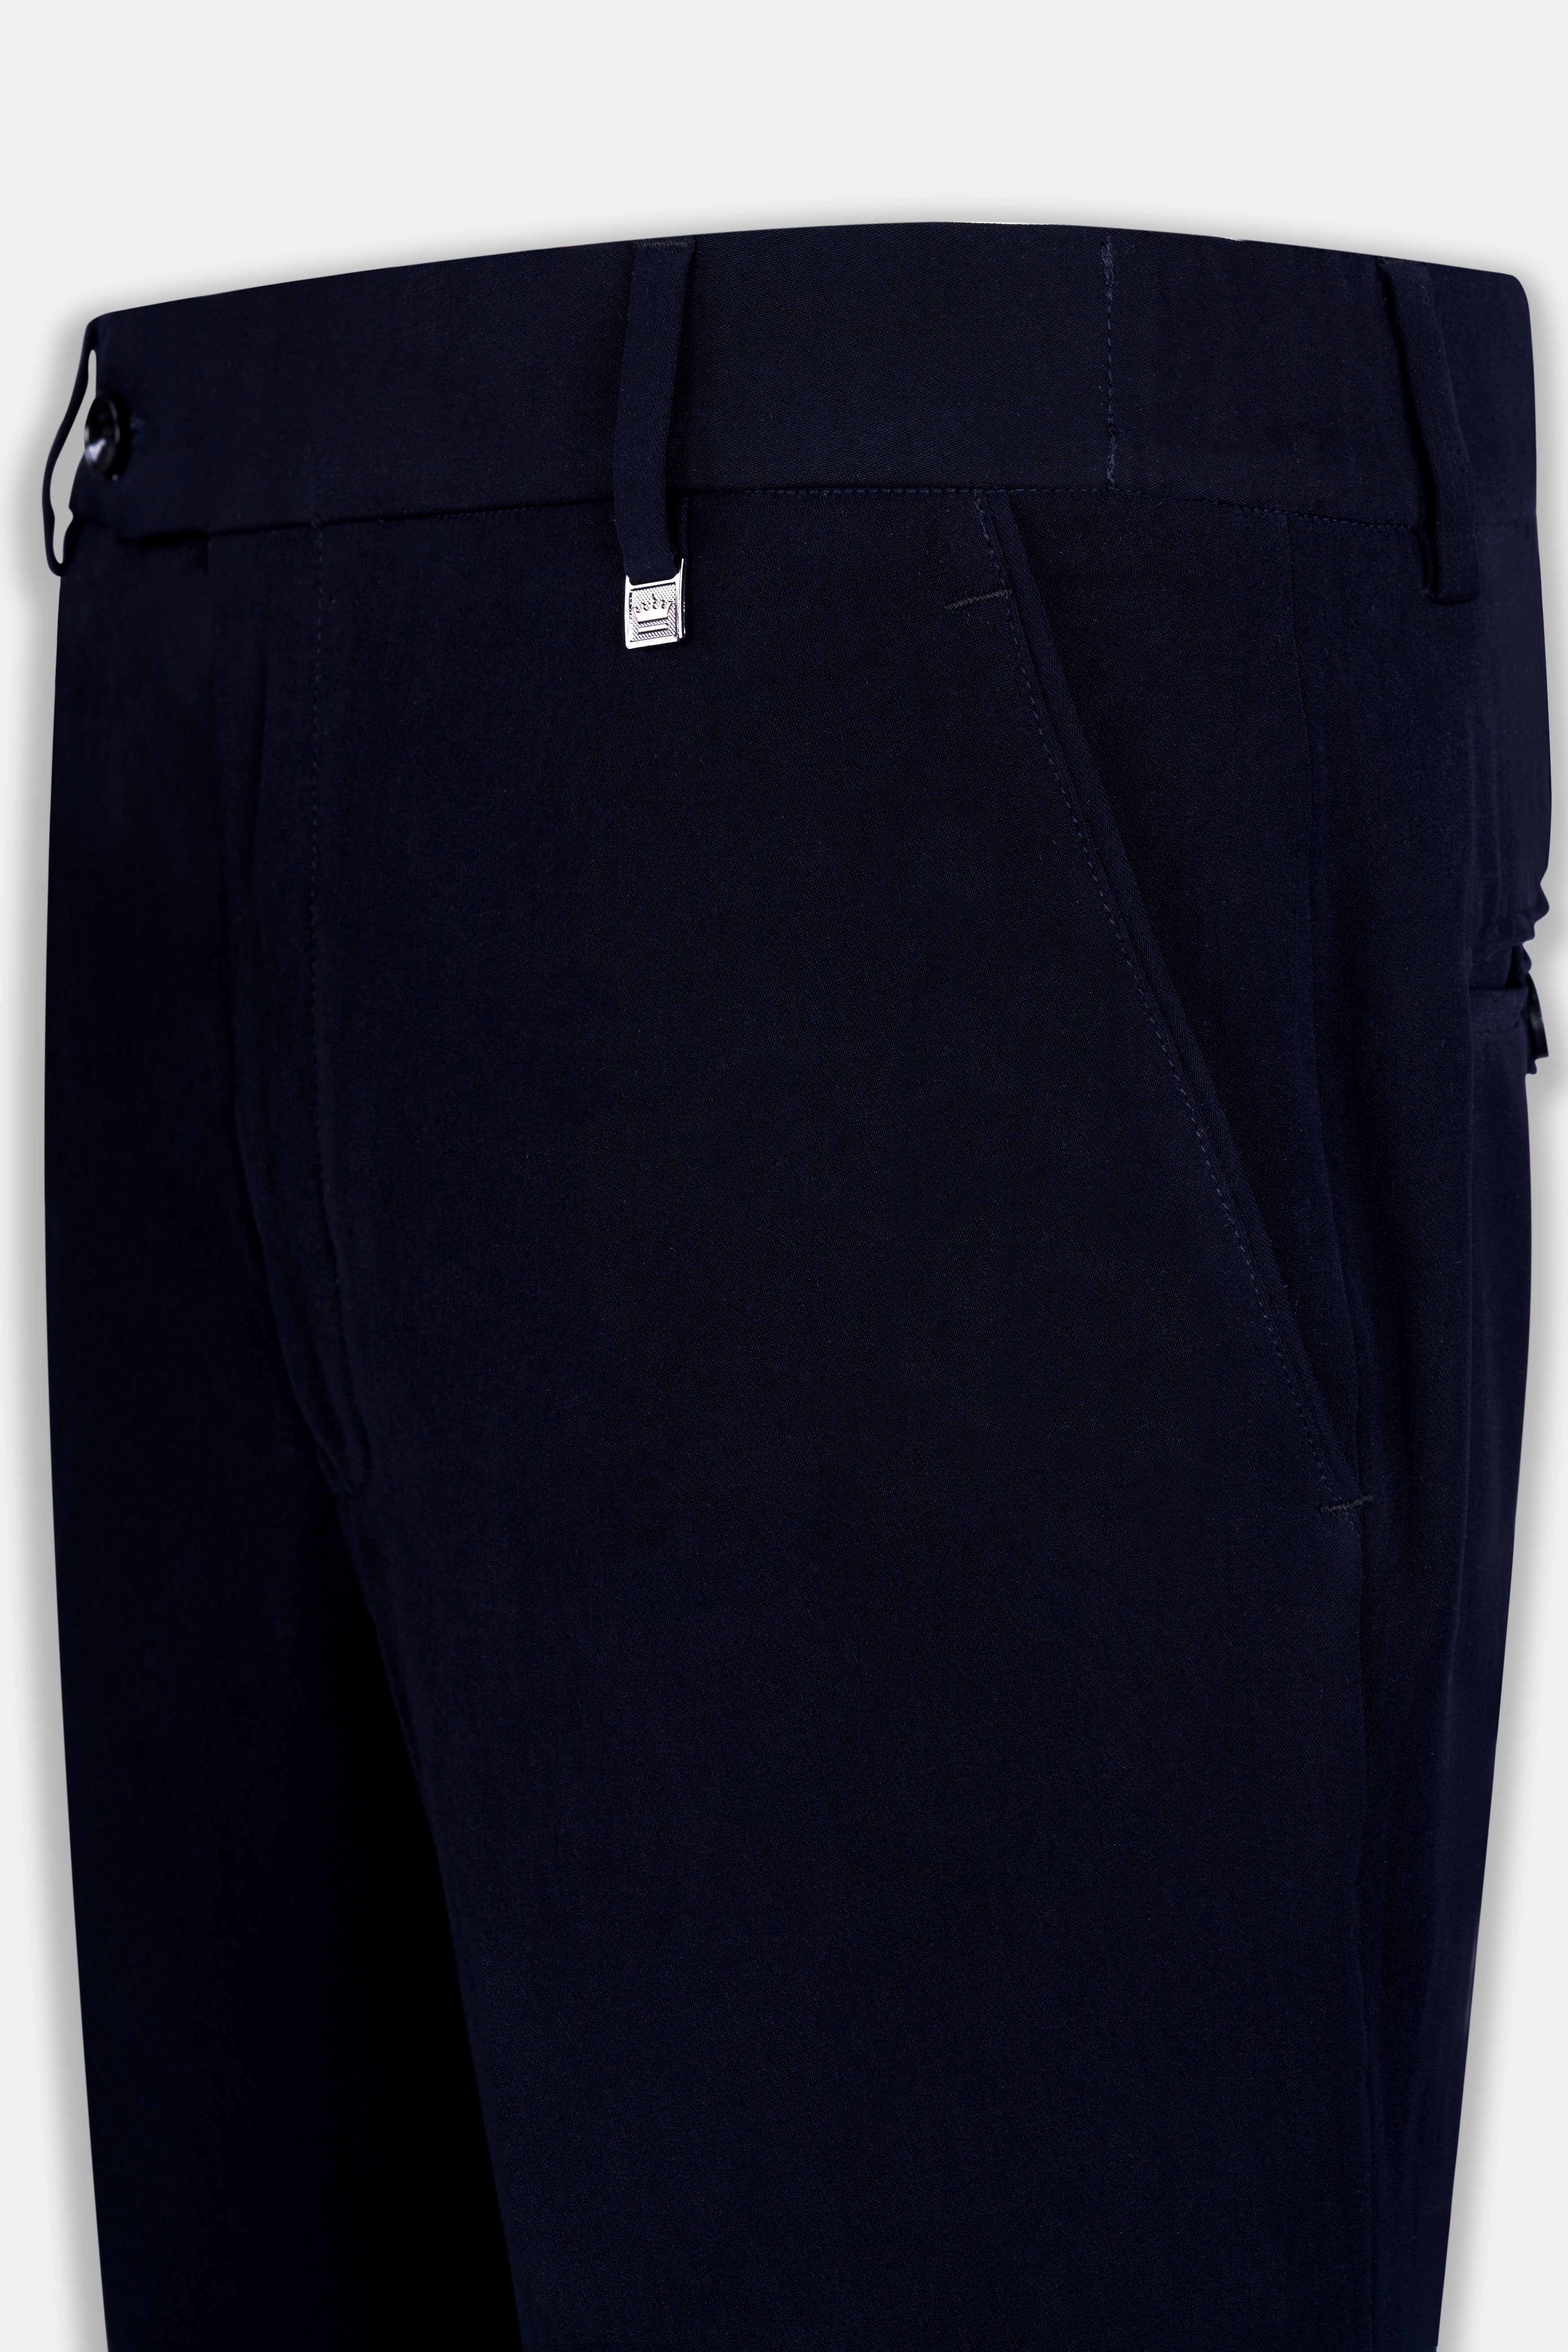 Korean Blue (The Best Blue We have) Wool Rich Stretchable Traveler Pant